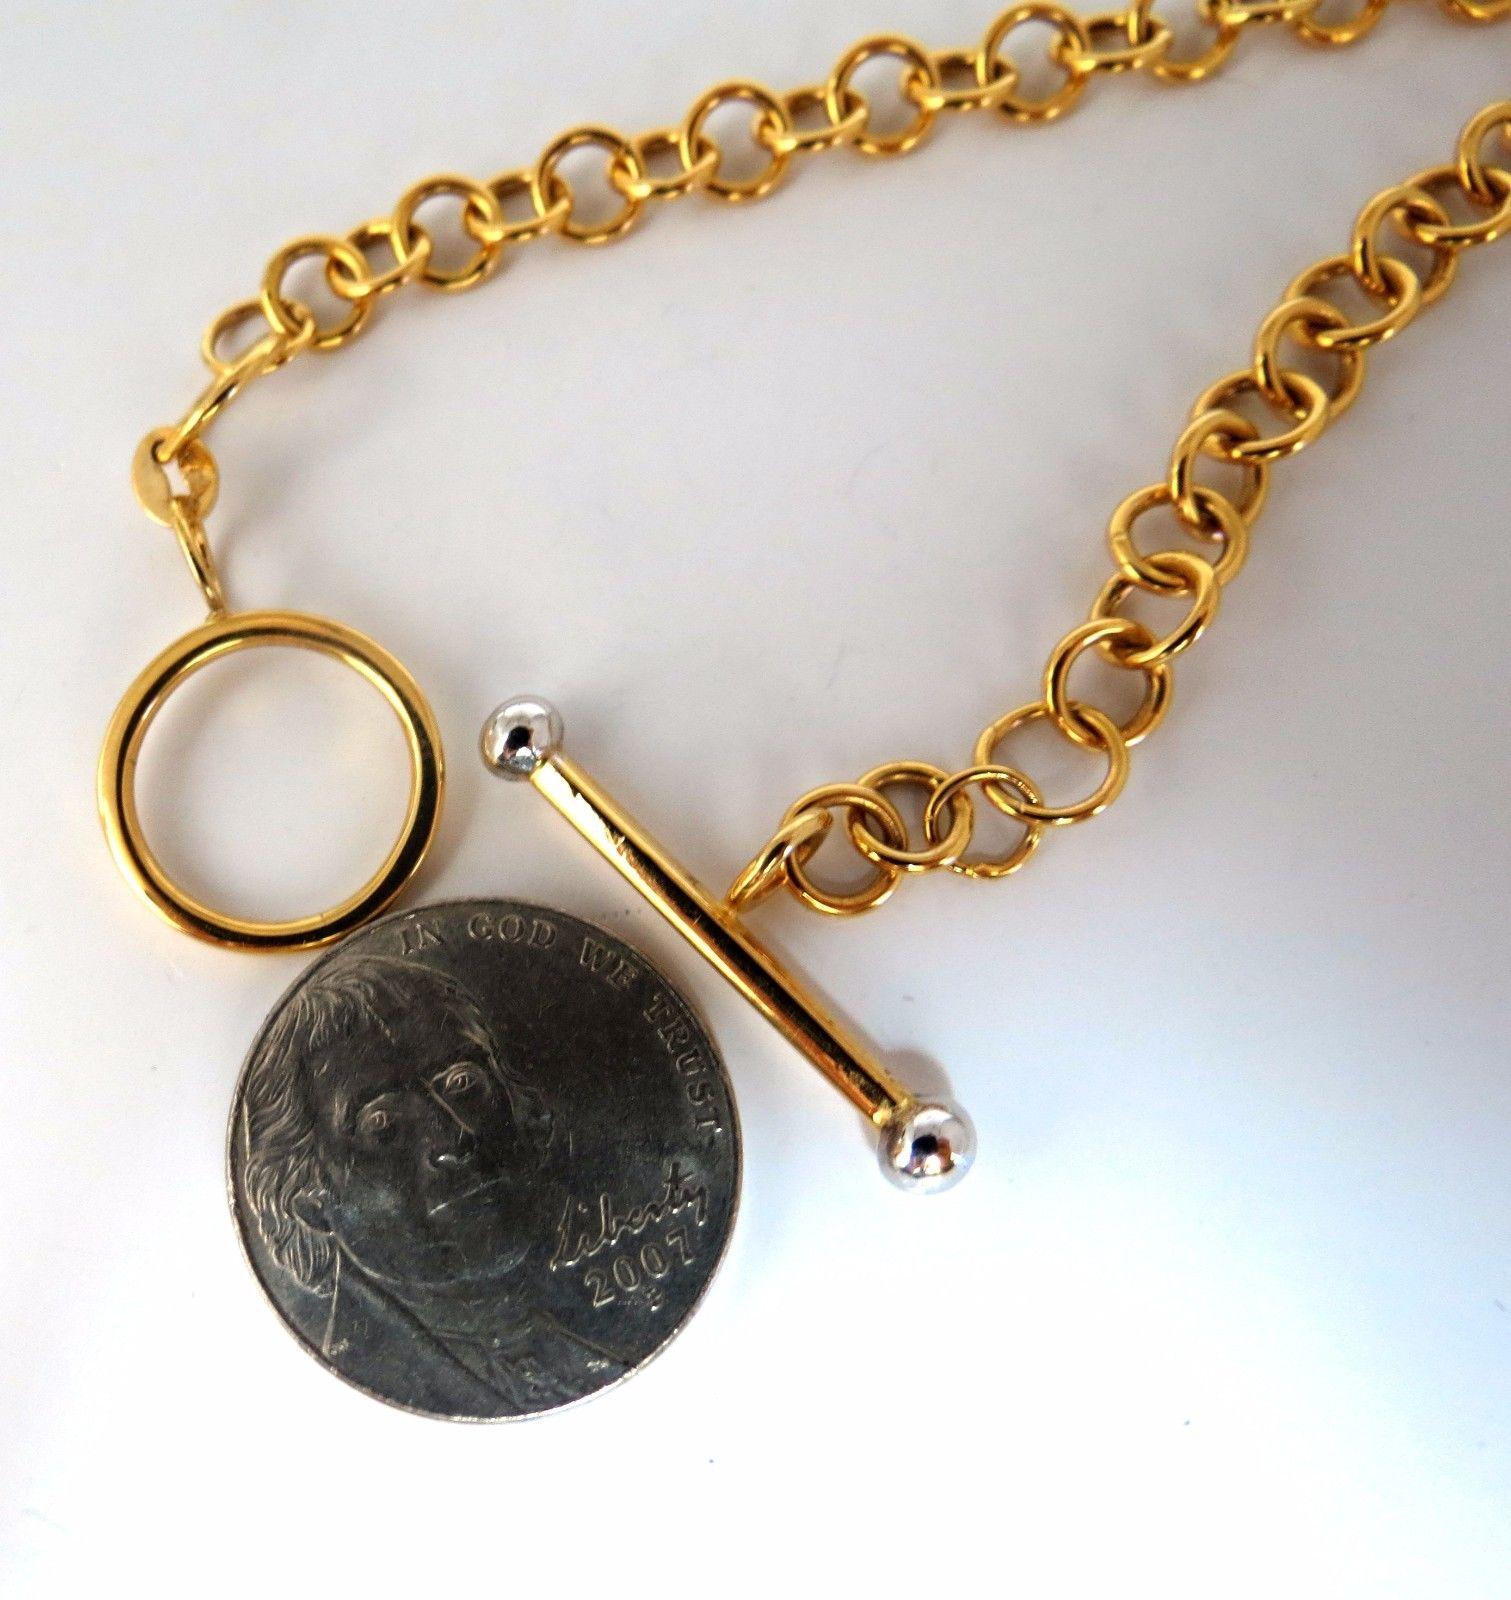 Toggle Circles Link

Necklace:

15 Inches (wearable length)

15mm Large circles (center)

5.7 mm smaller circles

Toggle Bar: 1.05 inch

Toggle circle: .60 inch



14kt. yellow gold 

15 Grams.

Comfortable Toggle Slip